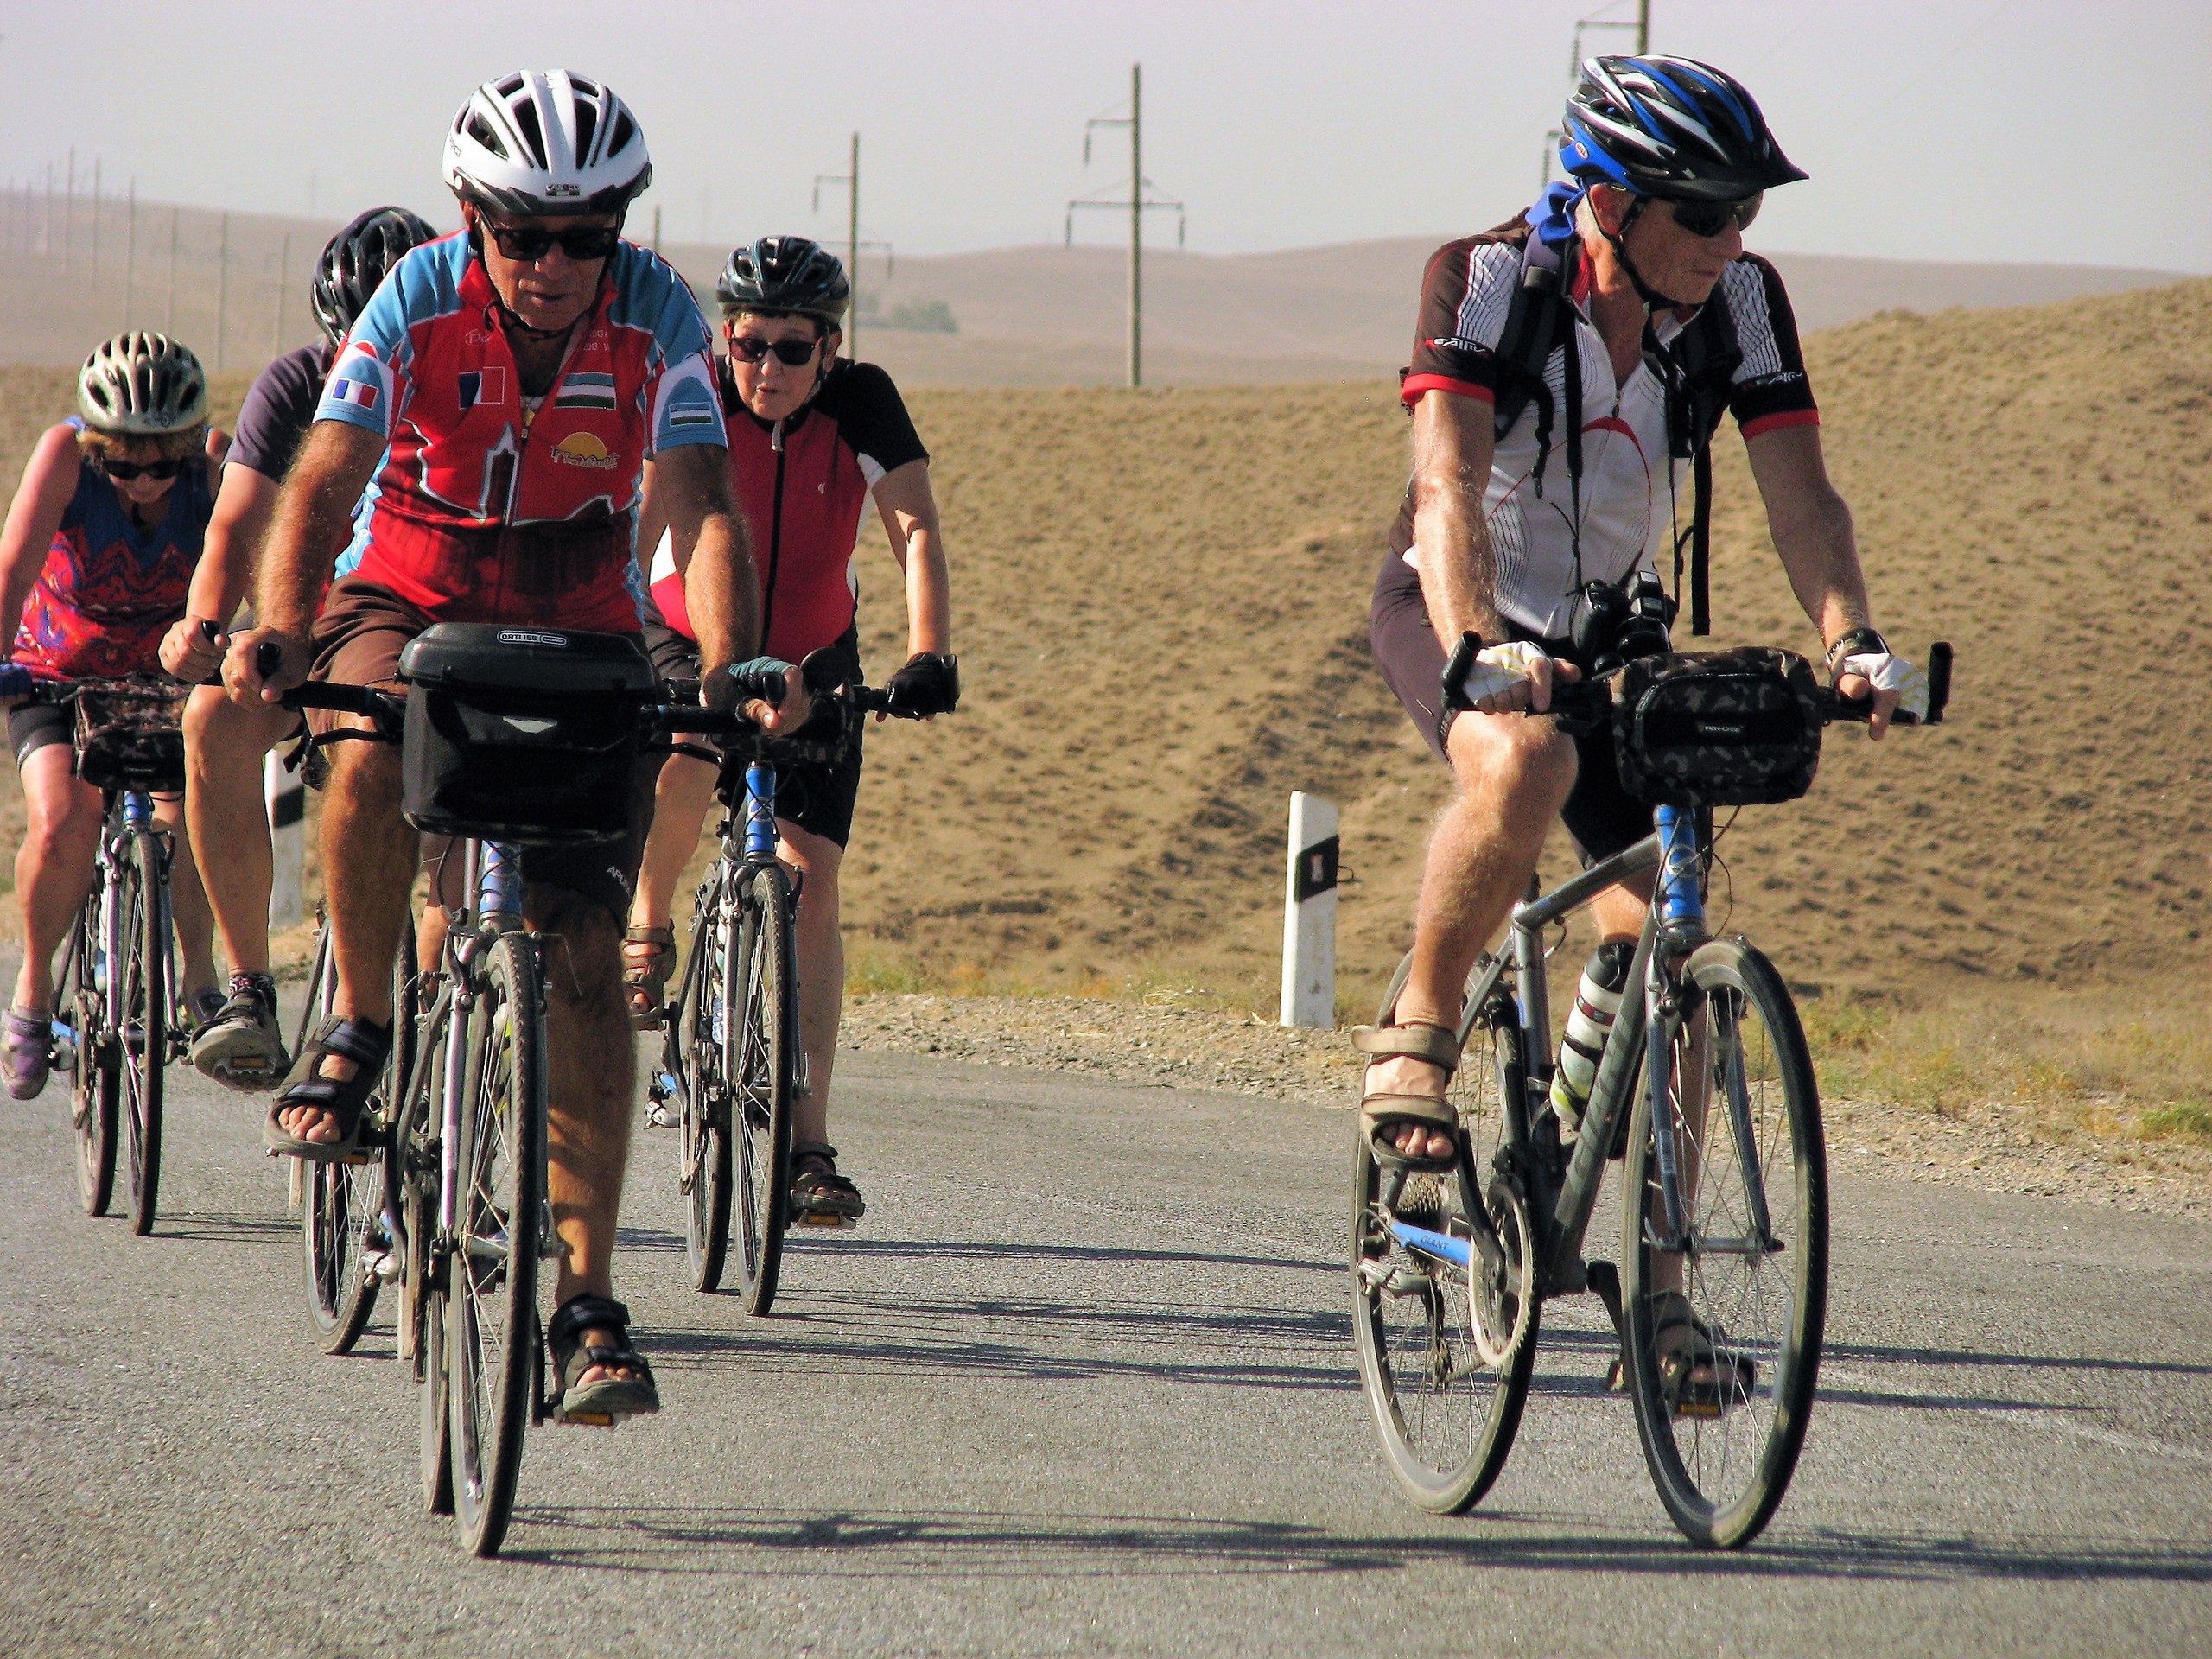 Cycling in the countryside of Uzbekistan